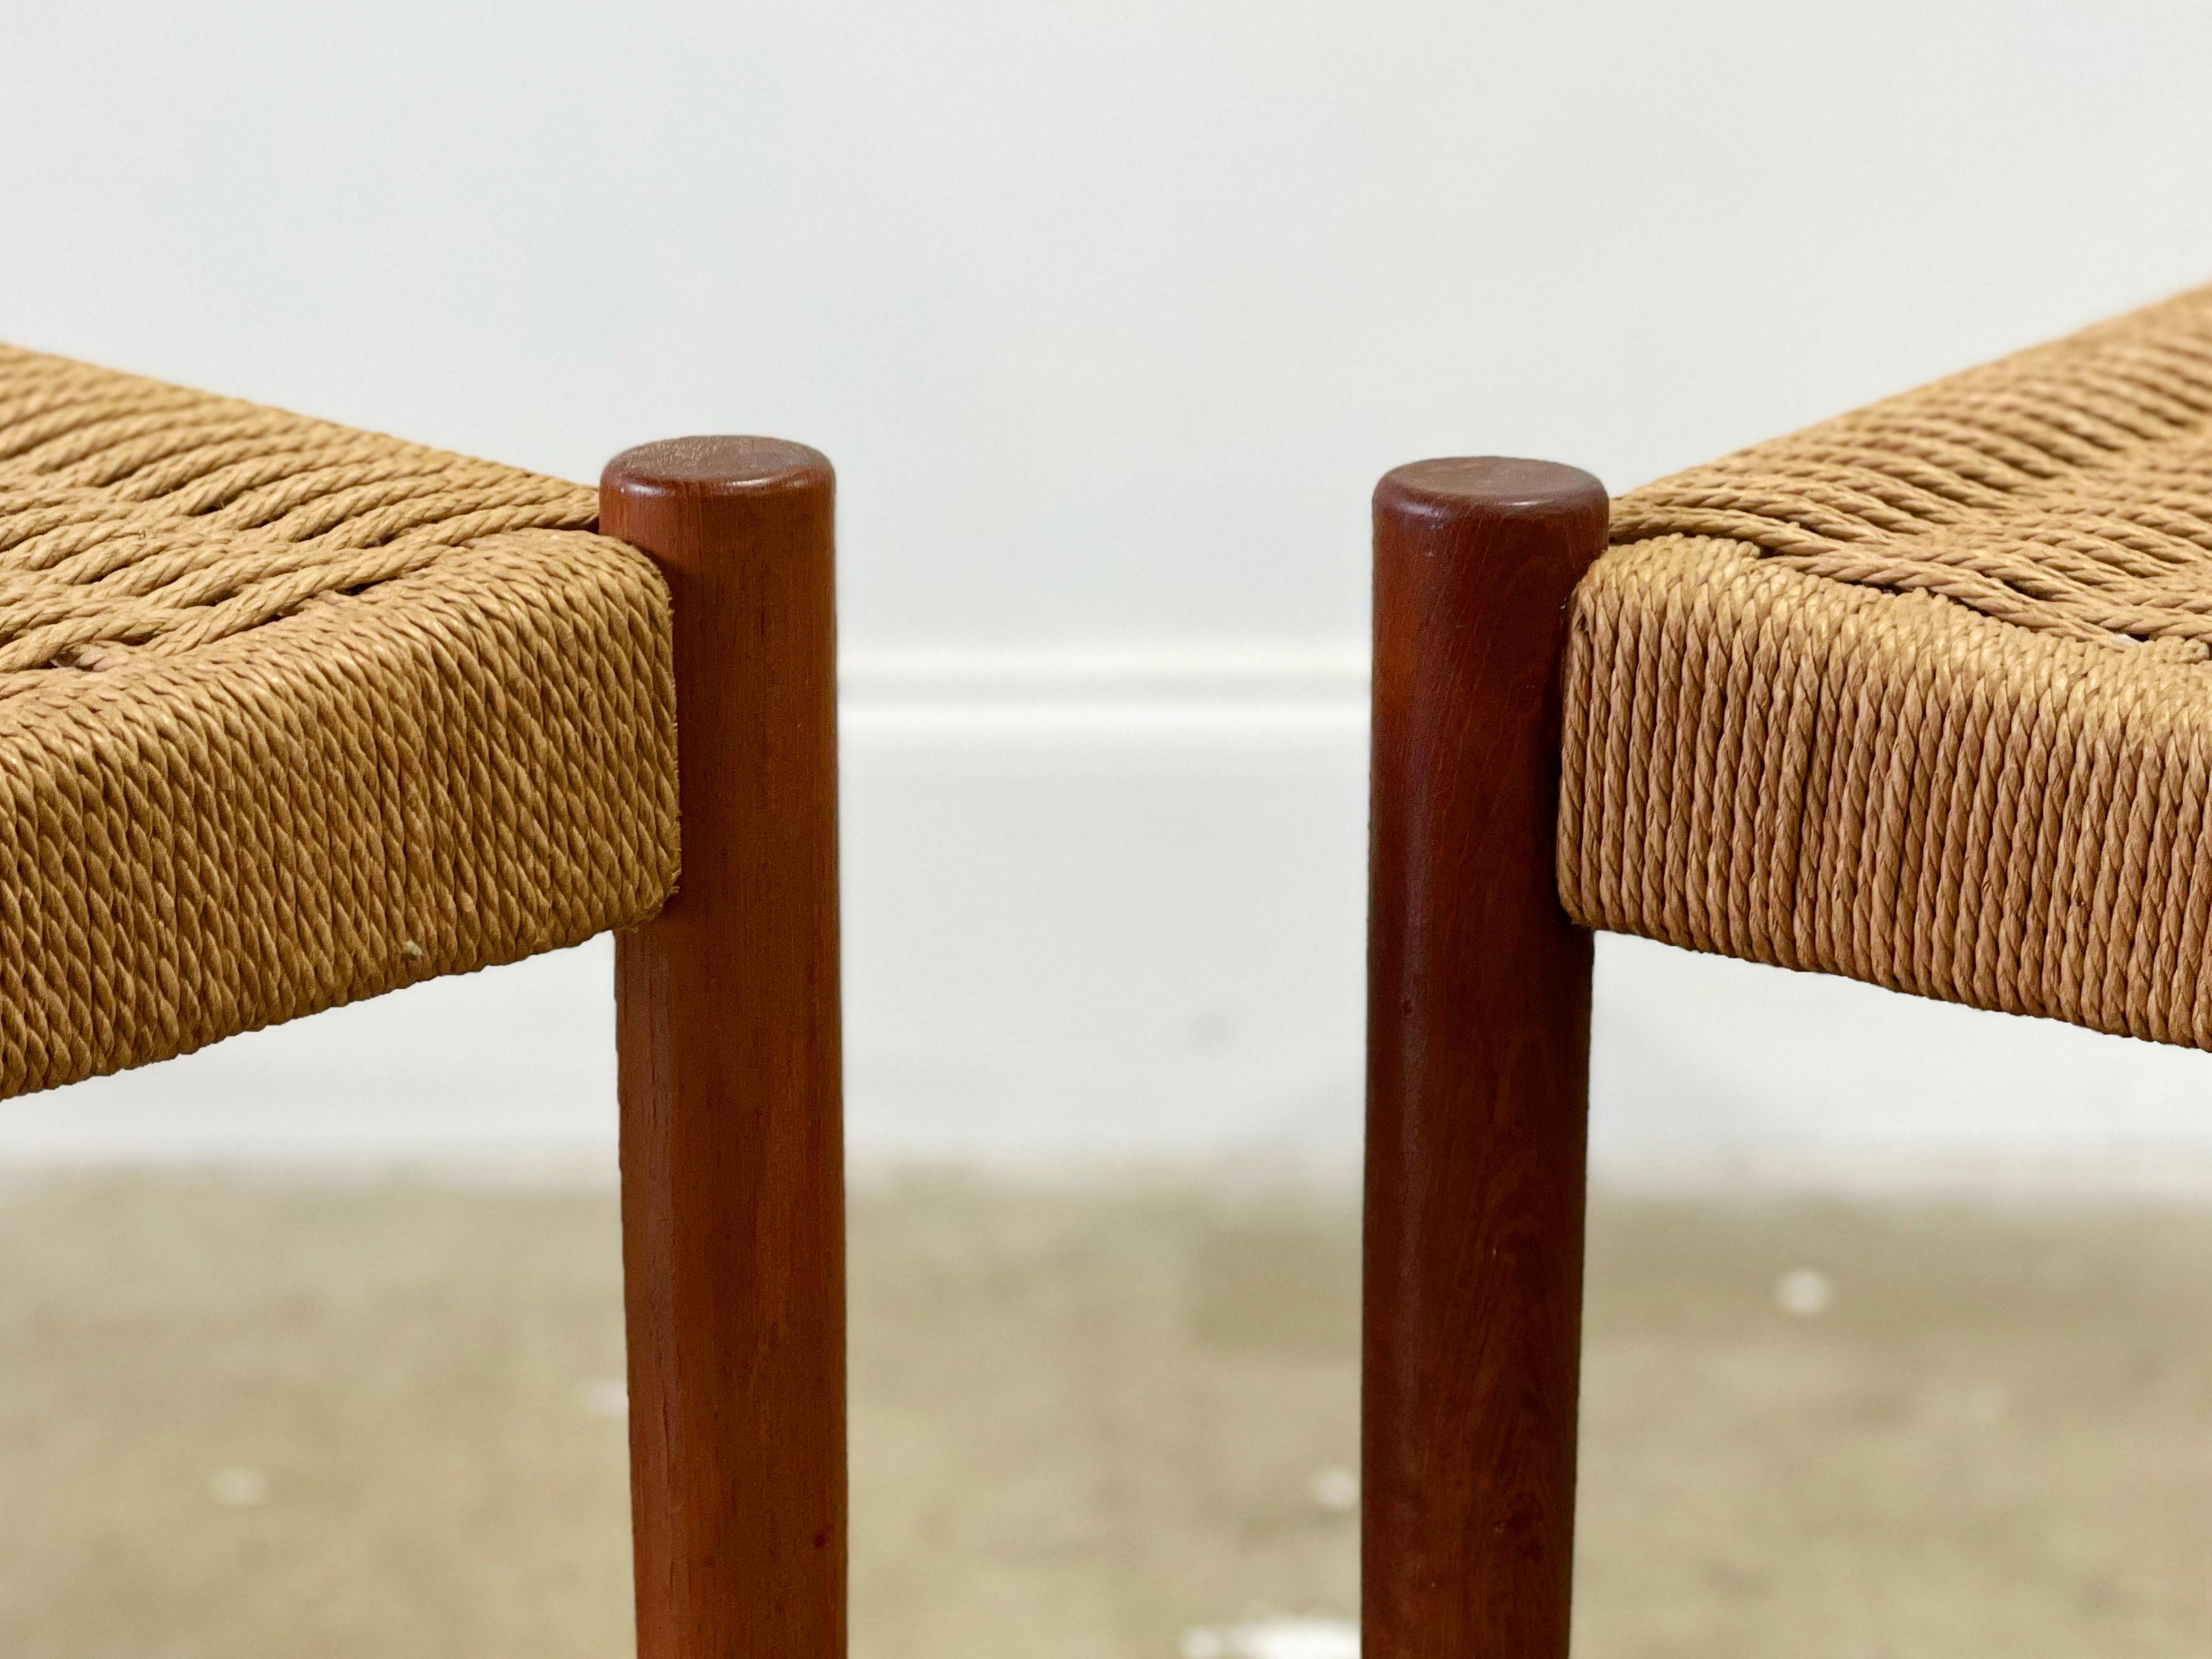 Scarcely seen pair of solid teak + Danish cord stools by Poul Volther for Frem Røjle, Denmark circa 1978. These look to be hardly, if ever used. Solid teak frames have been cleaned and conditioned and are free of any flaws. Original Danish rush